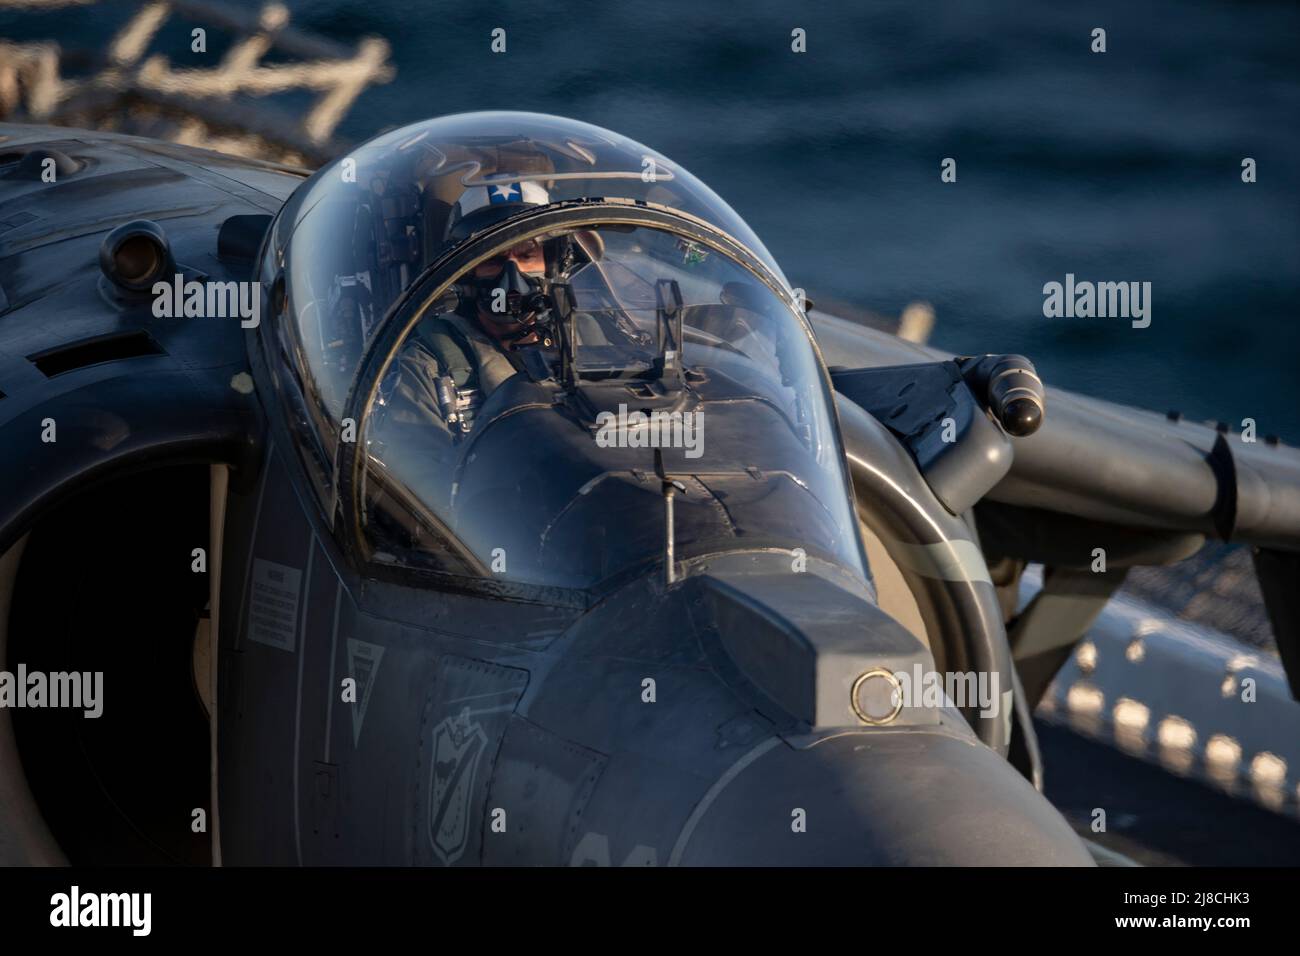 U.S. Marine Corps AV-8B Harrier attached to the Black Sheep of Marine Attack Squadron 214, prepares to launch from the flight deck of the Wasp-class amphibious assault ship USS Essex, March 21, 2021 on the Pacific Ocean. Stock Photo